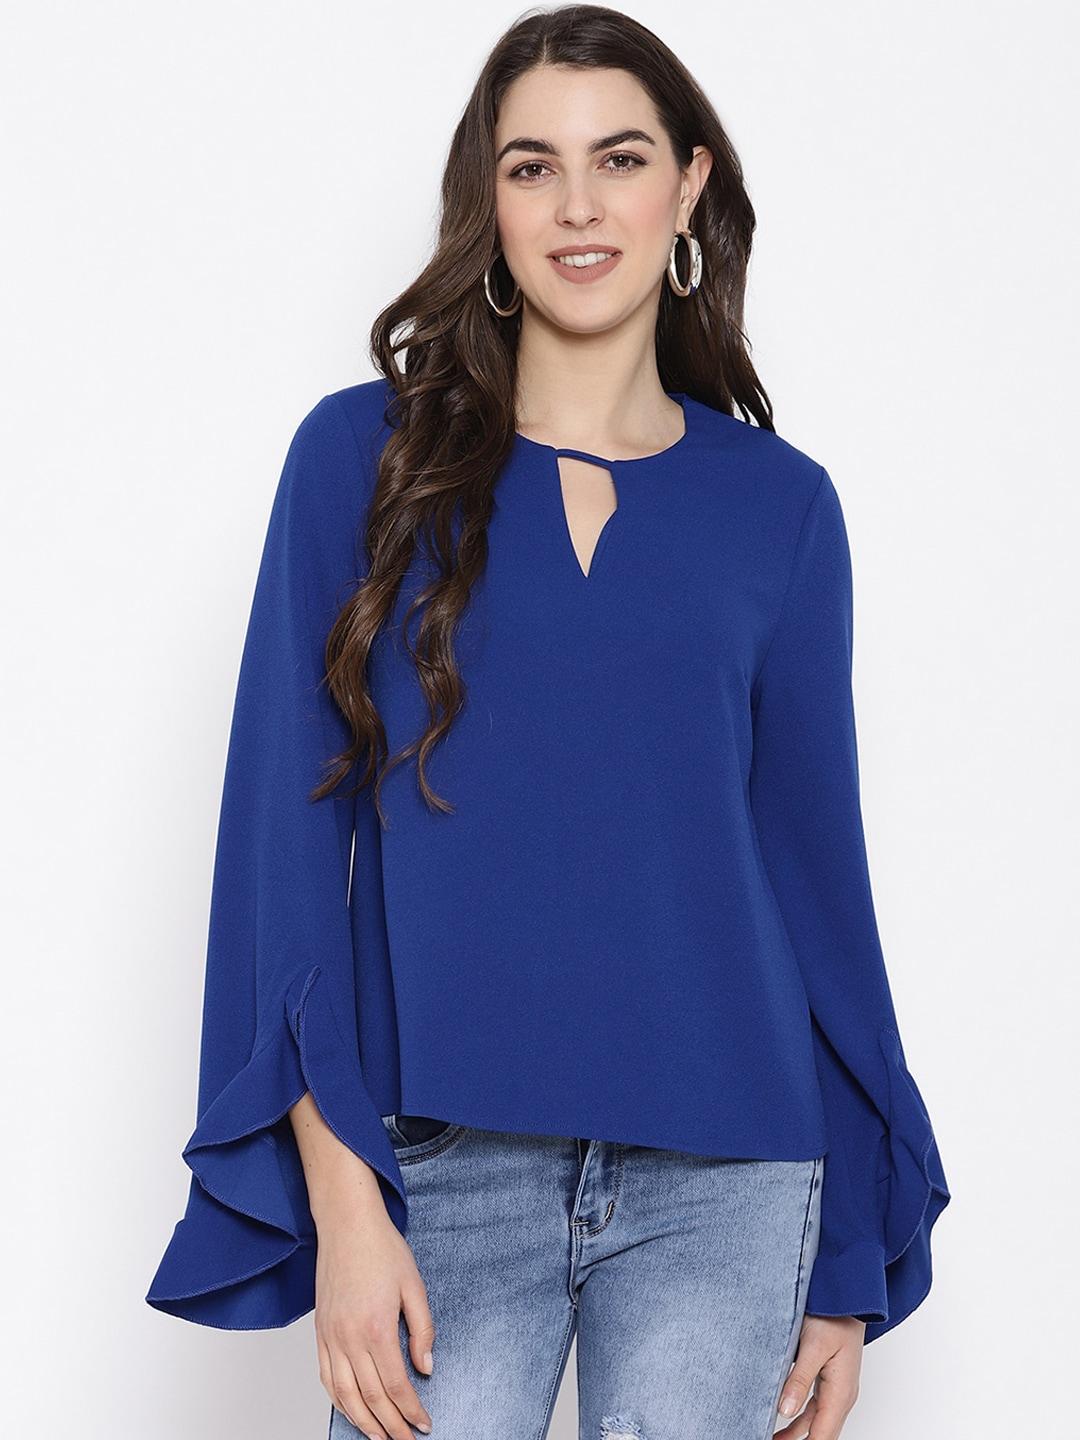 iki chic solid blue keyhole neck flared sleeves top